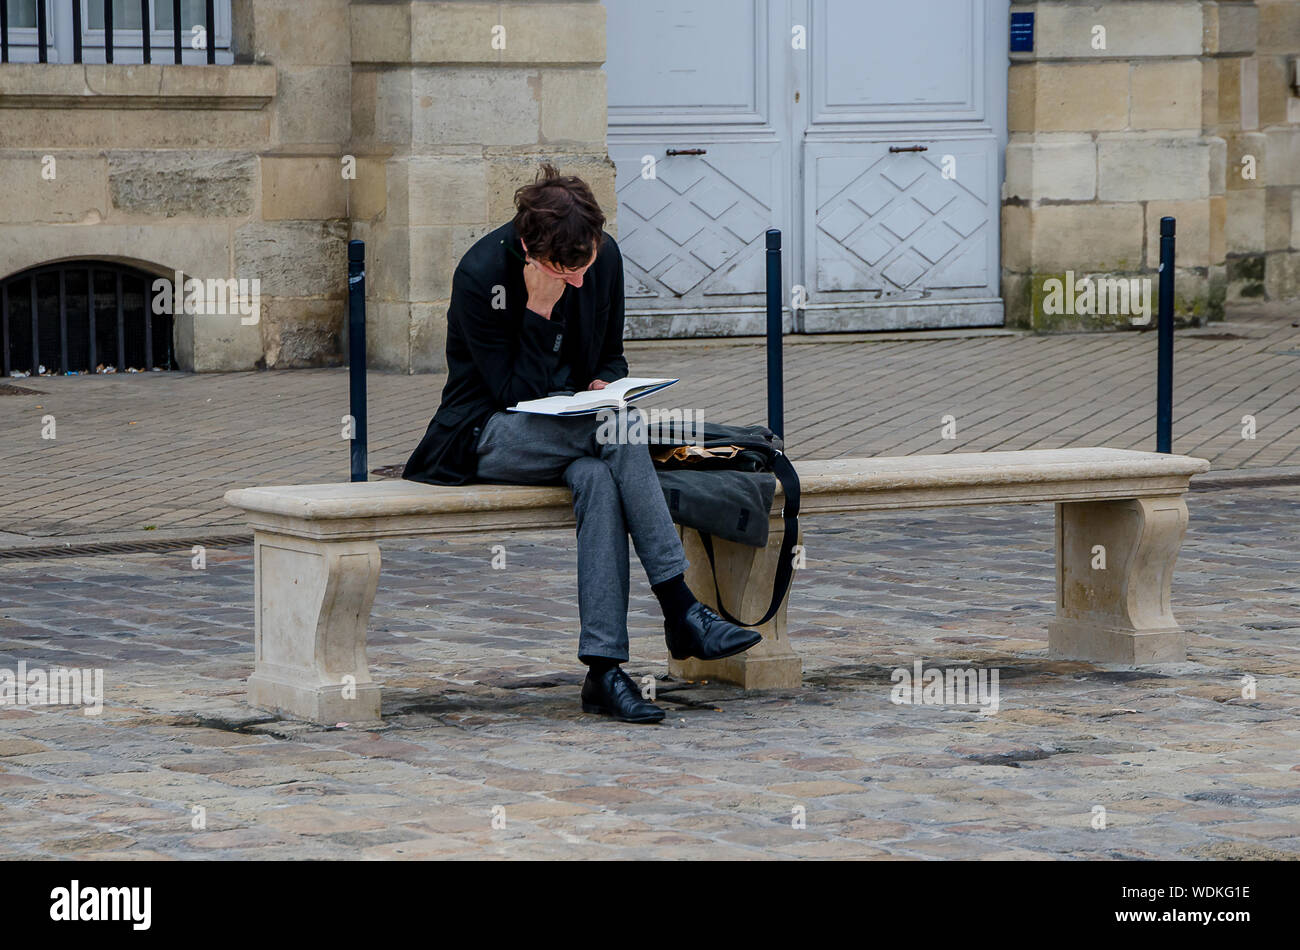 Man reading sitting on a bench in Bordeaux, France, in September 2013 Stock Photo